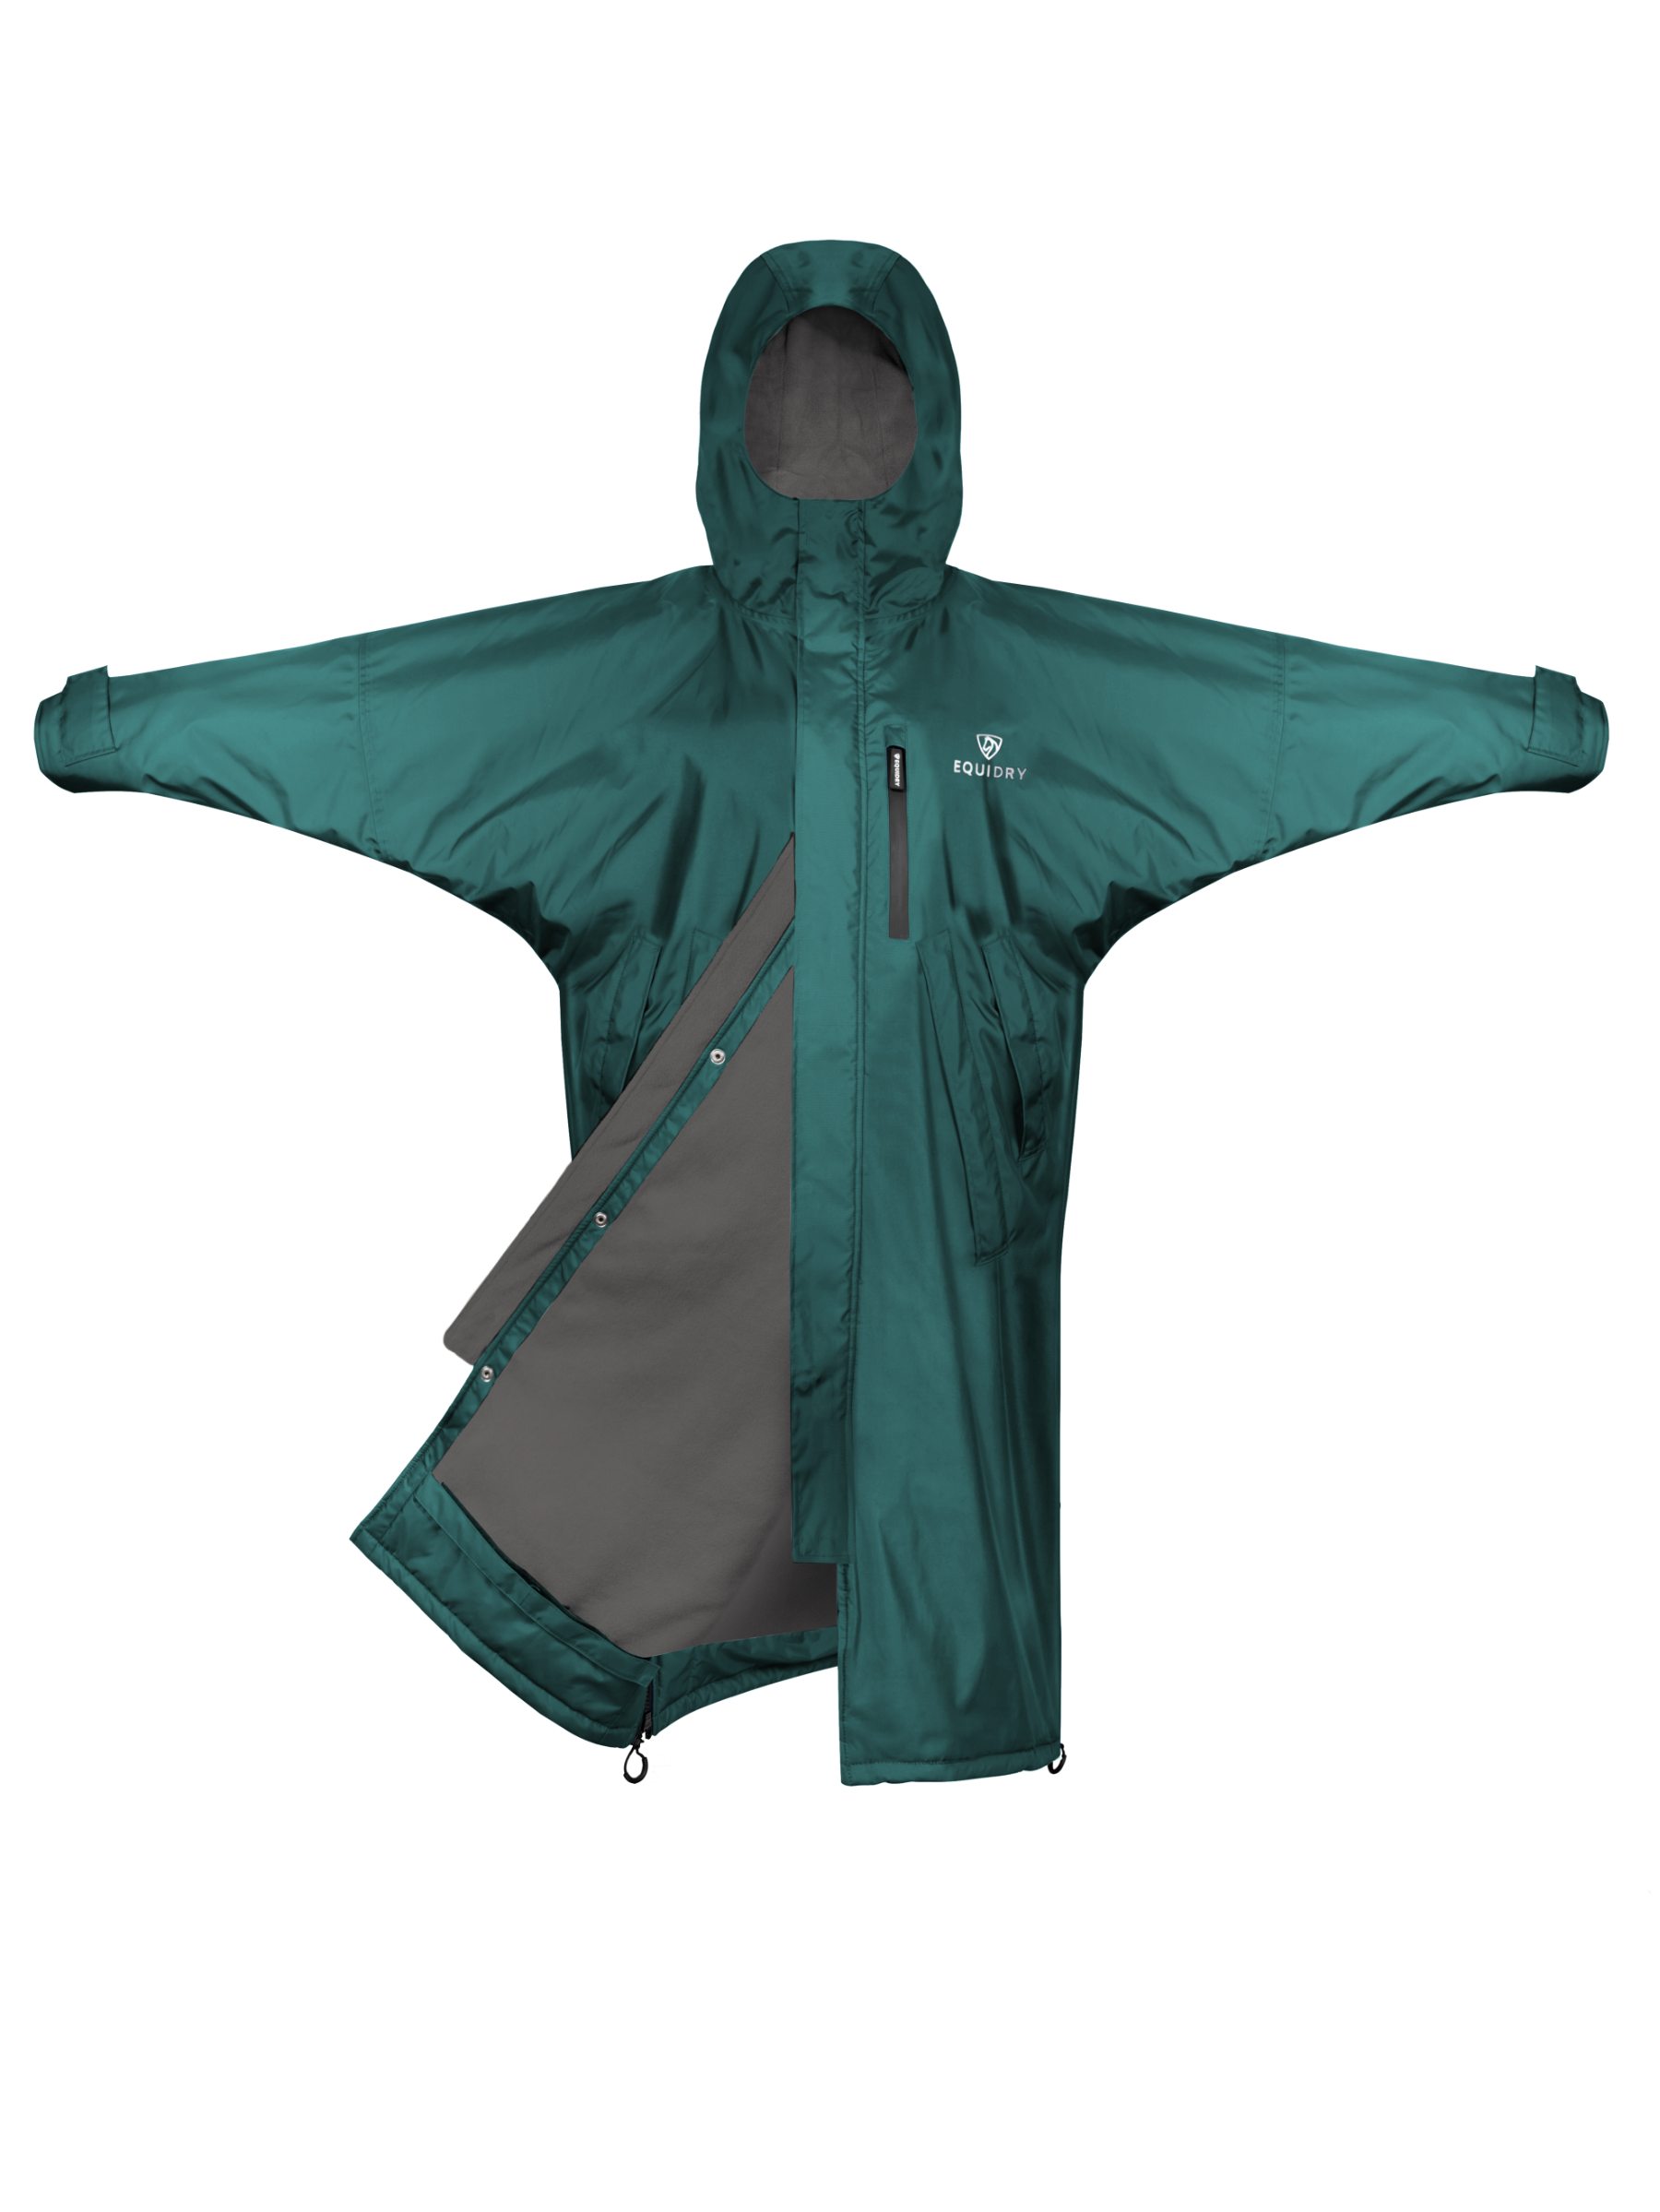  Teal EQUIDRY Equestrian oversized waterproof Horse Riding Coat with side zips 